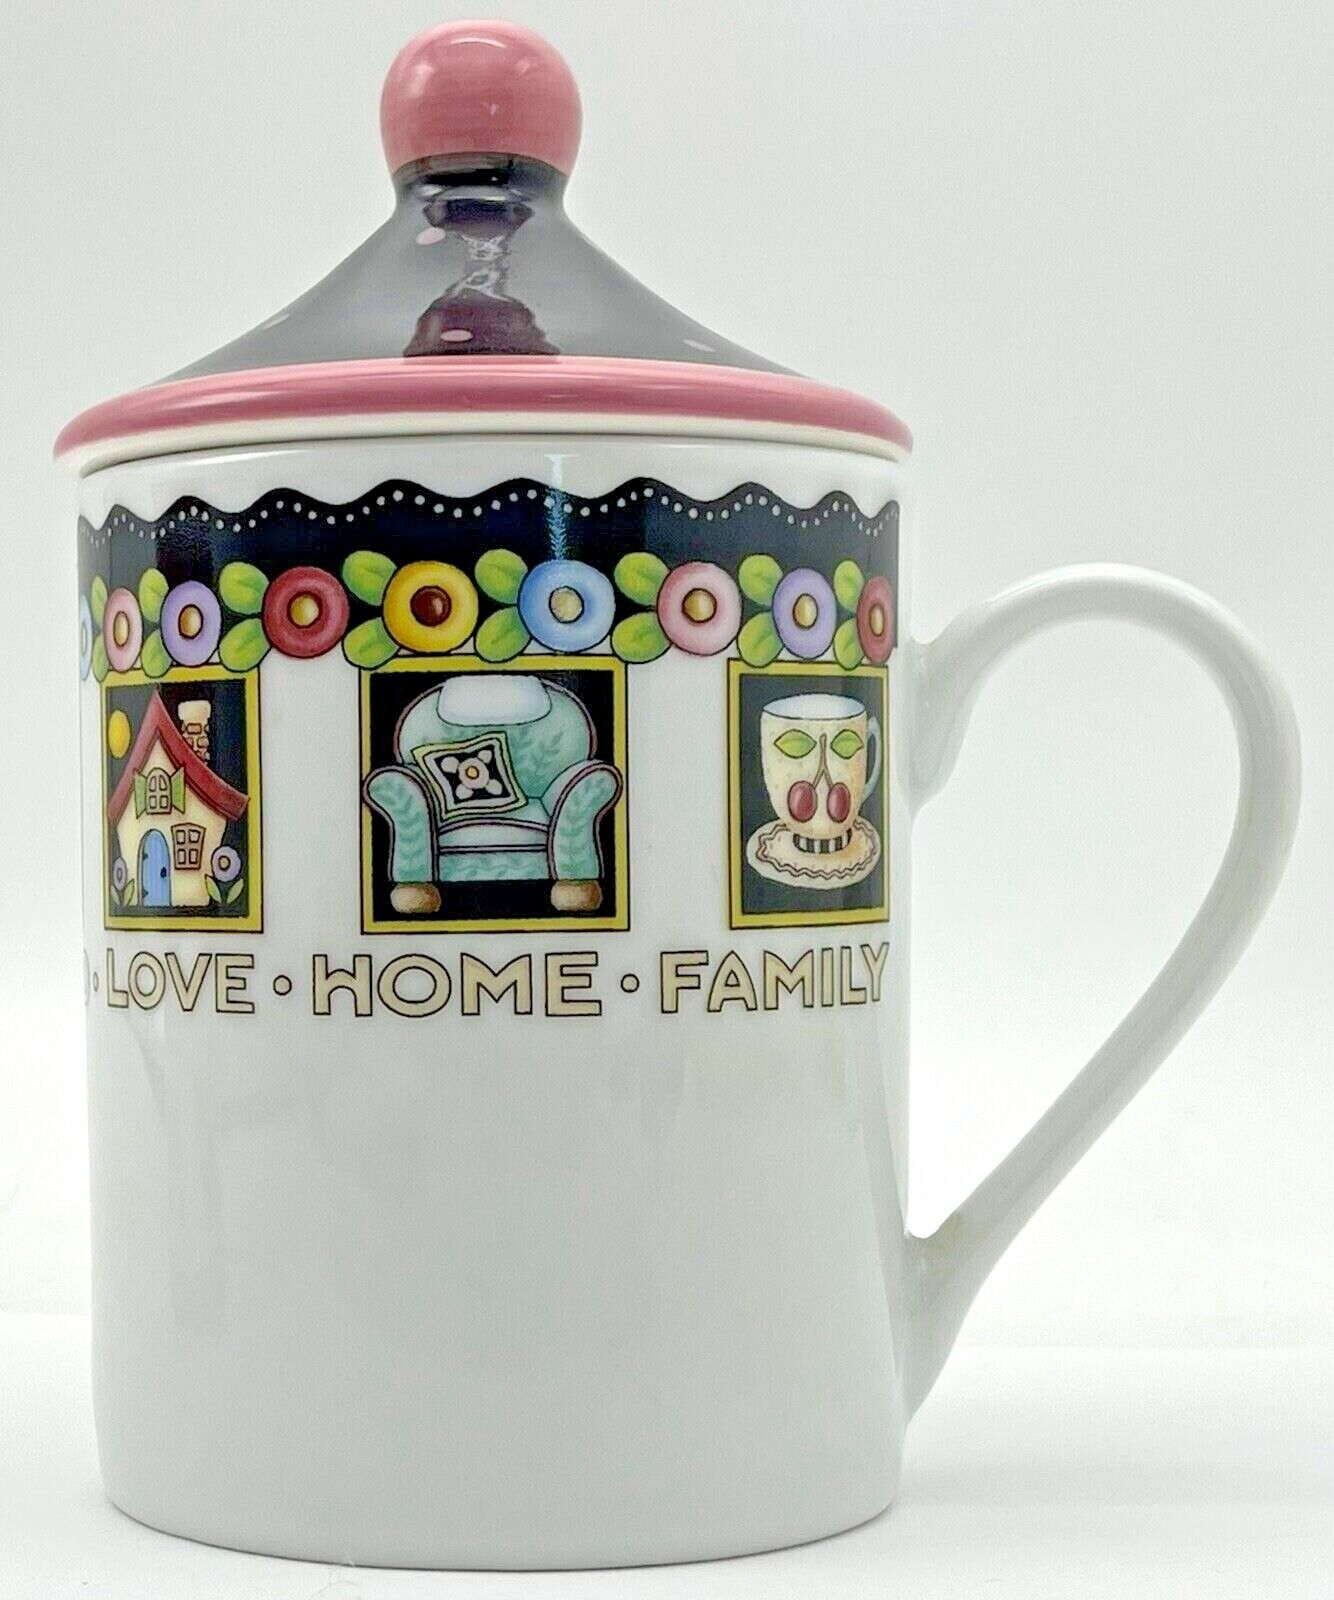 Mary Engelbreit Coffee Mug Cup with Lid Love Home Family Friend 2001